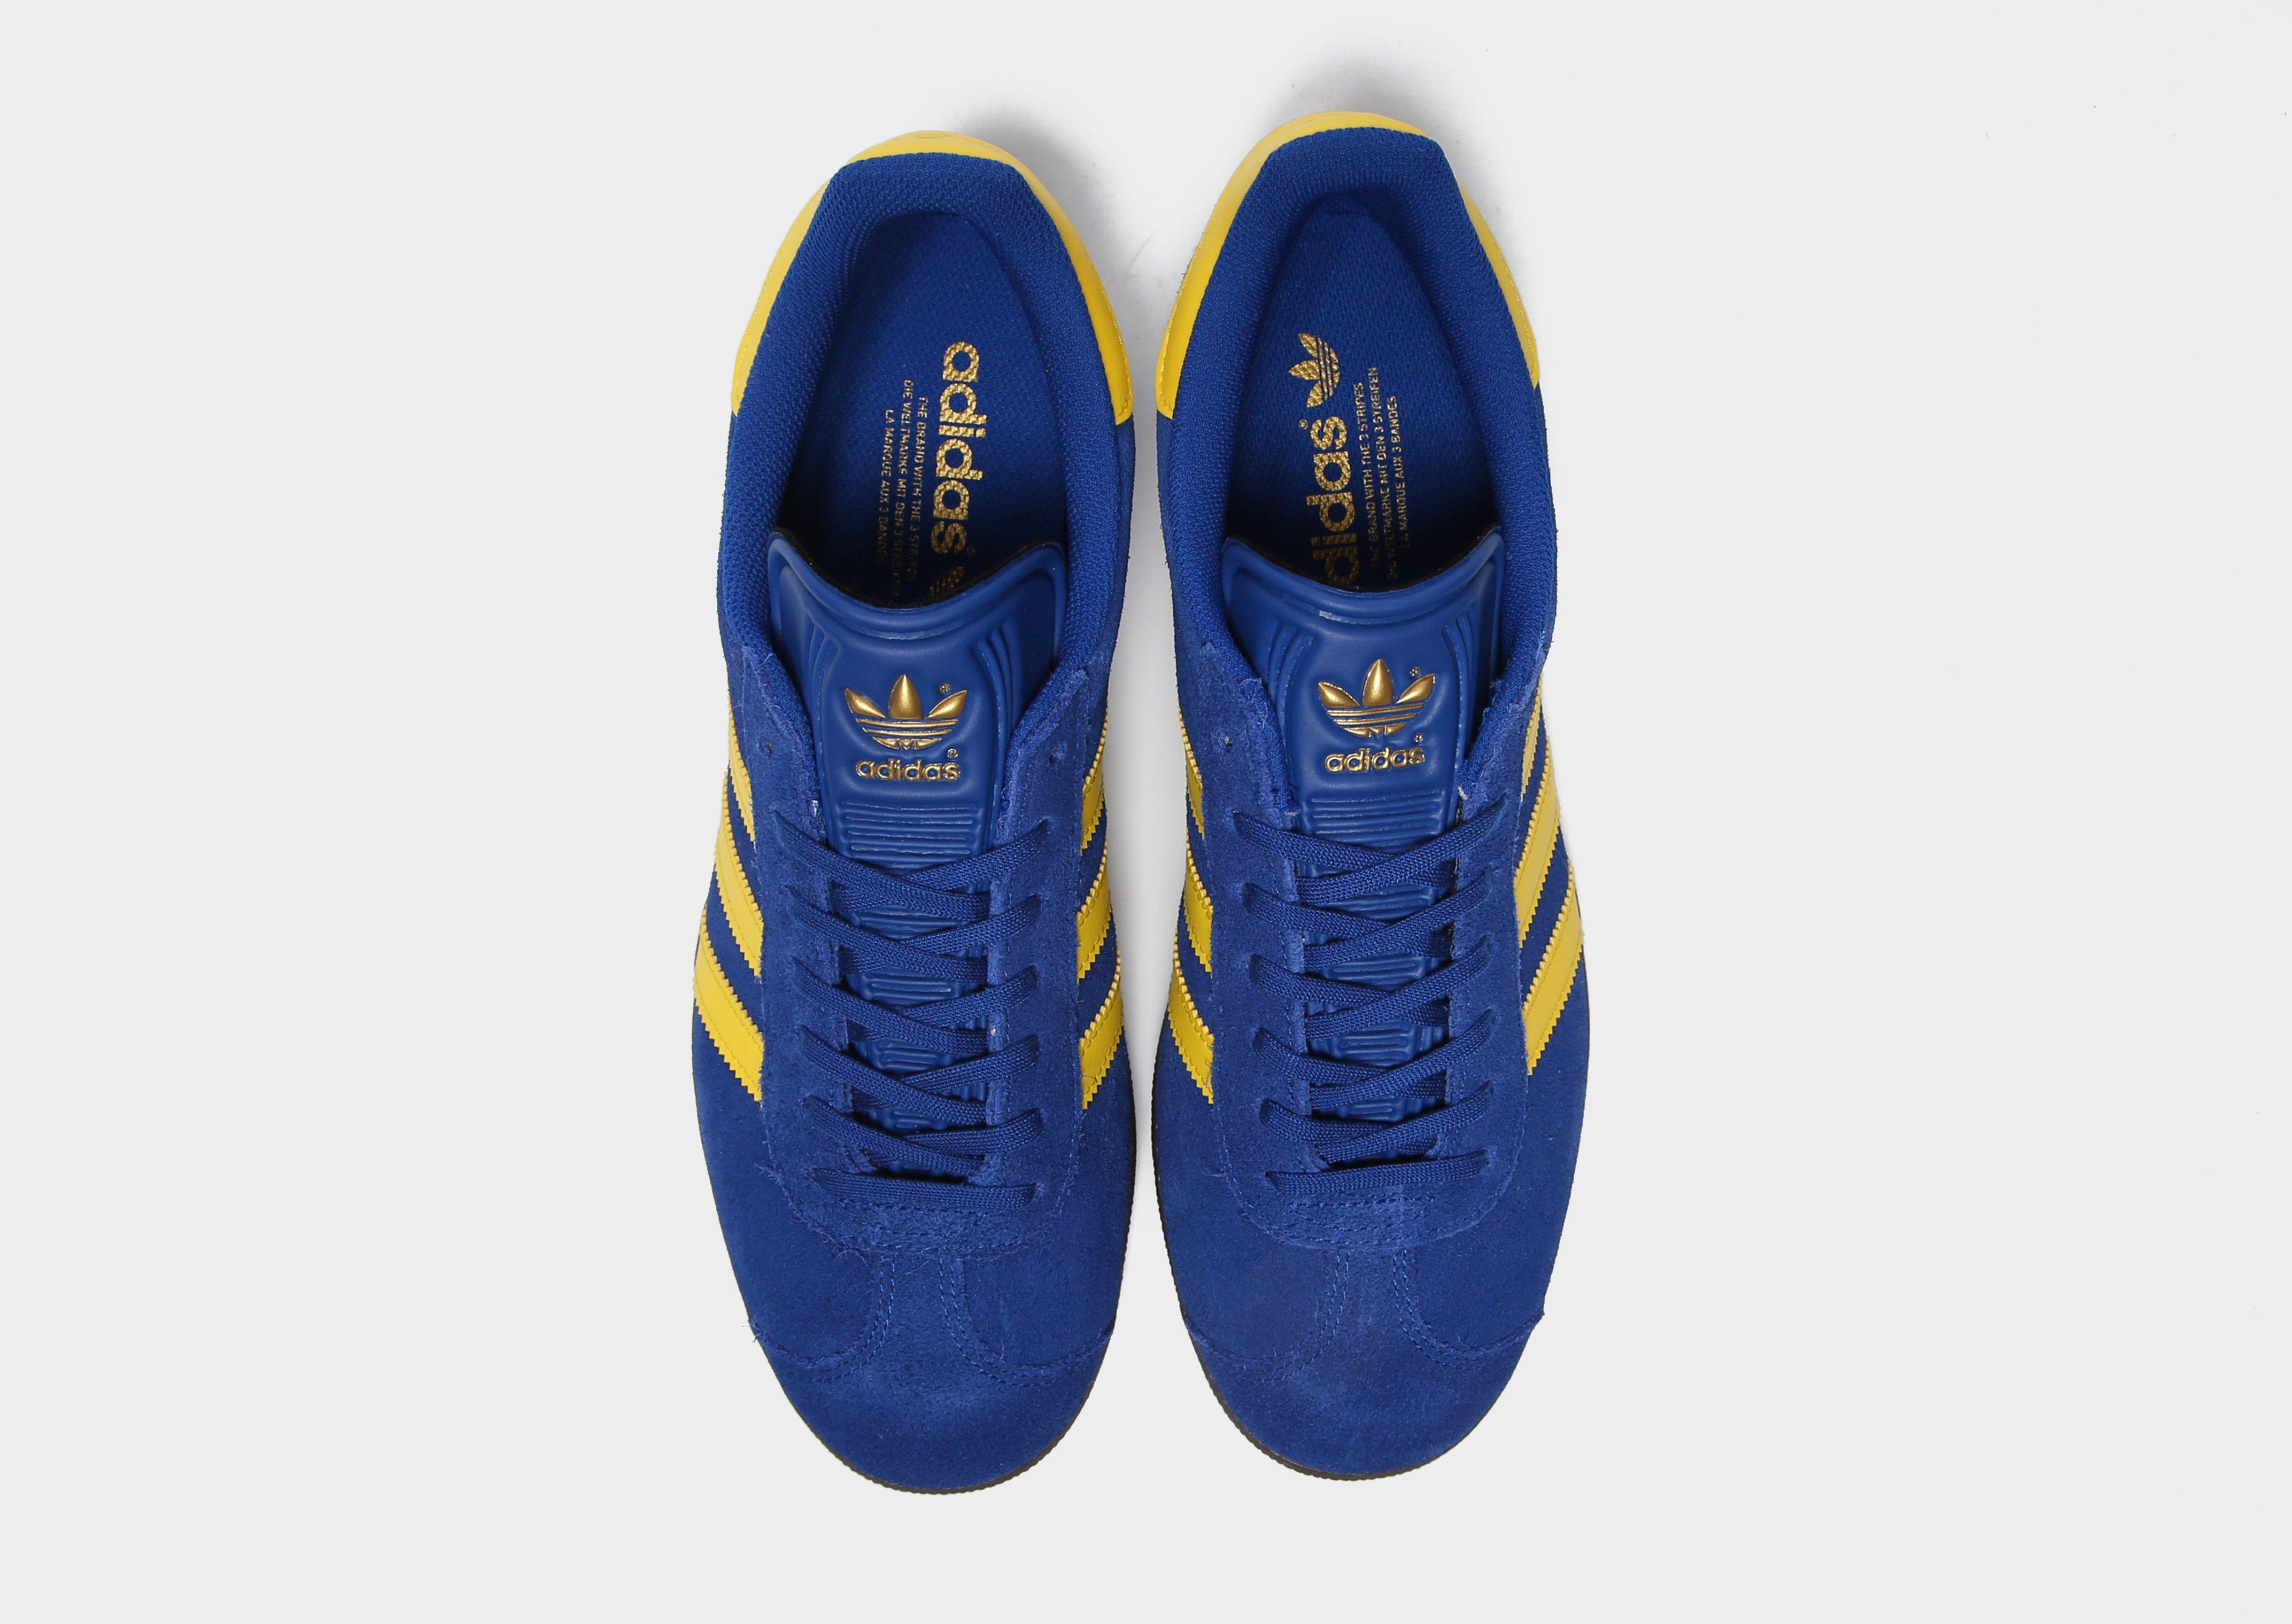 blue and yellow gazelles mens